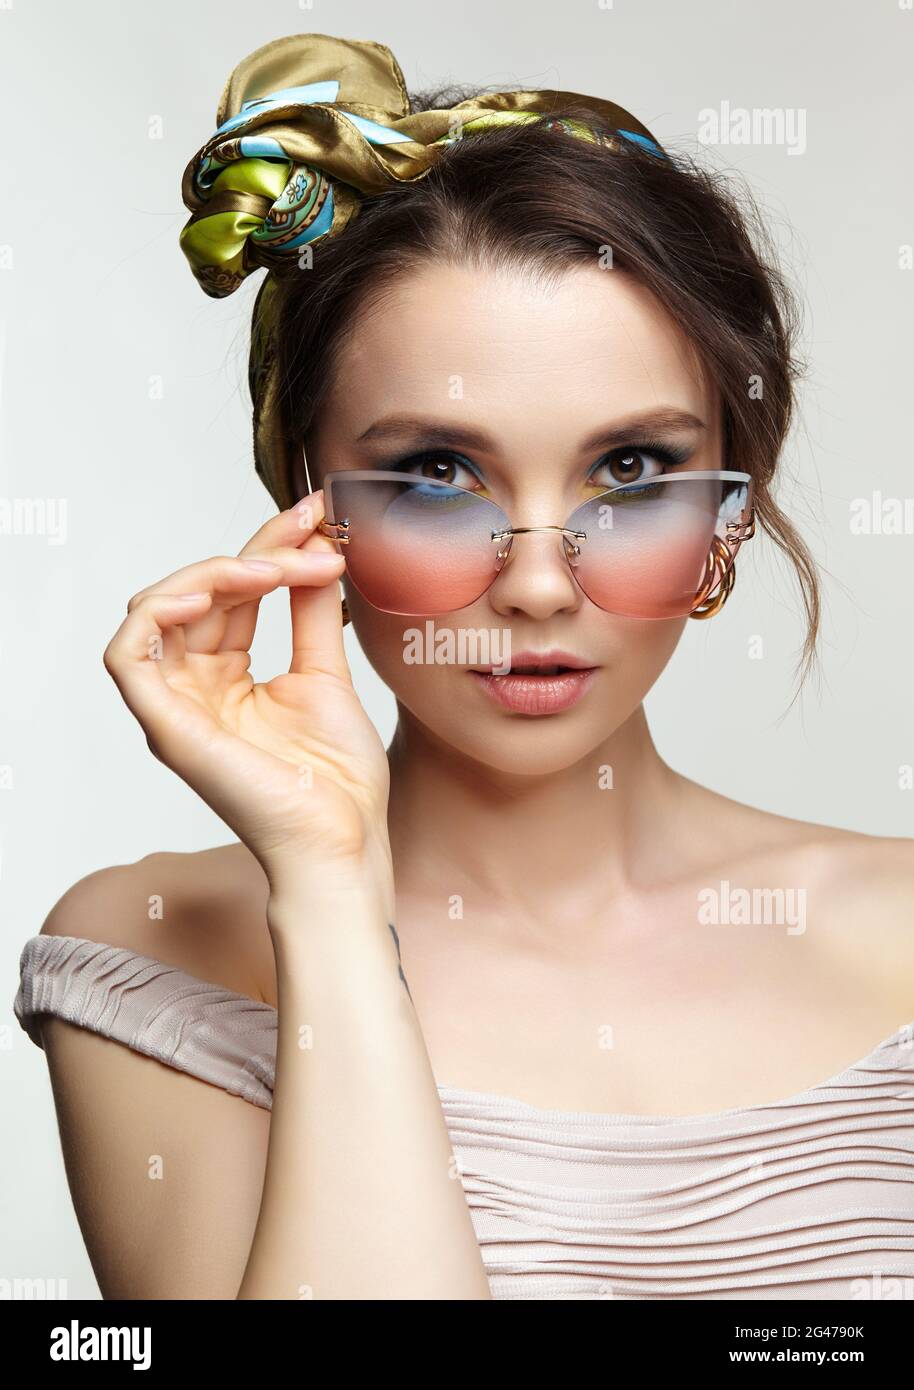 Female in headscarf is looking at the camera through sunglasses. Stock Photo